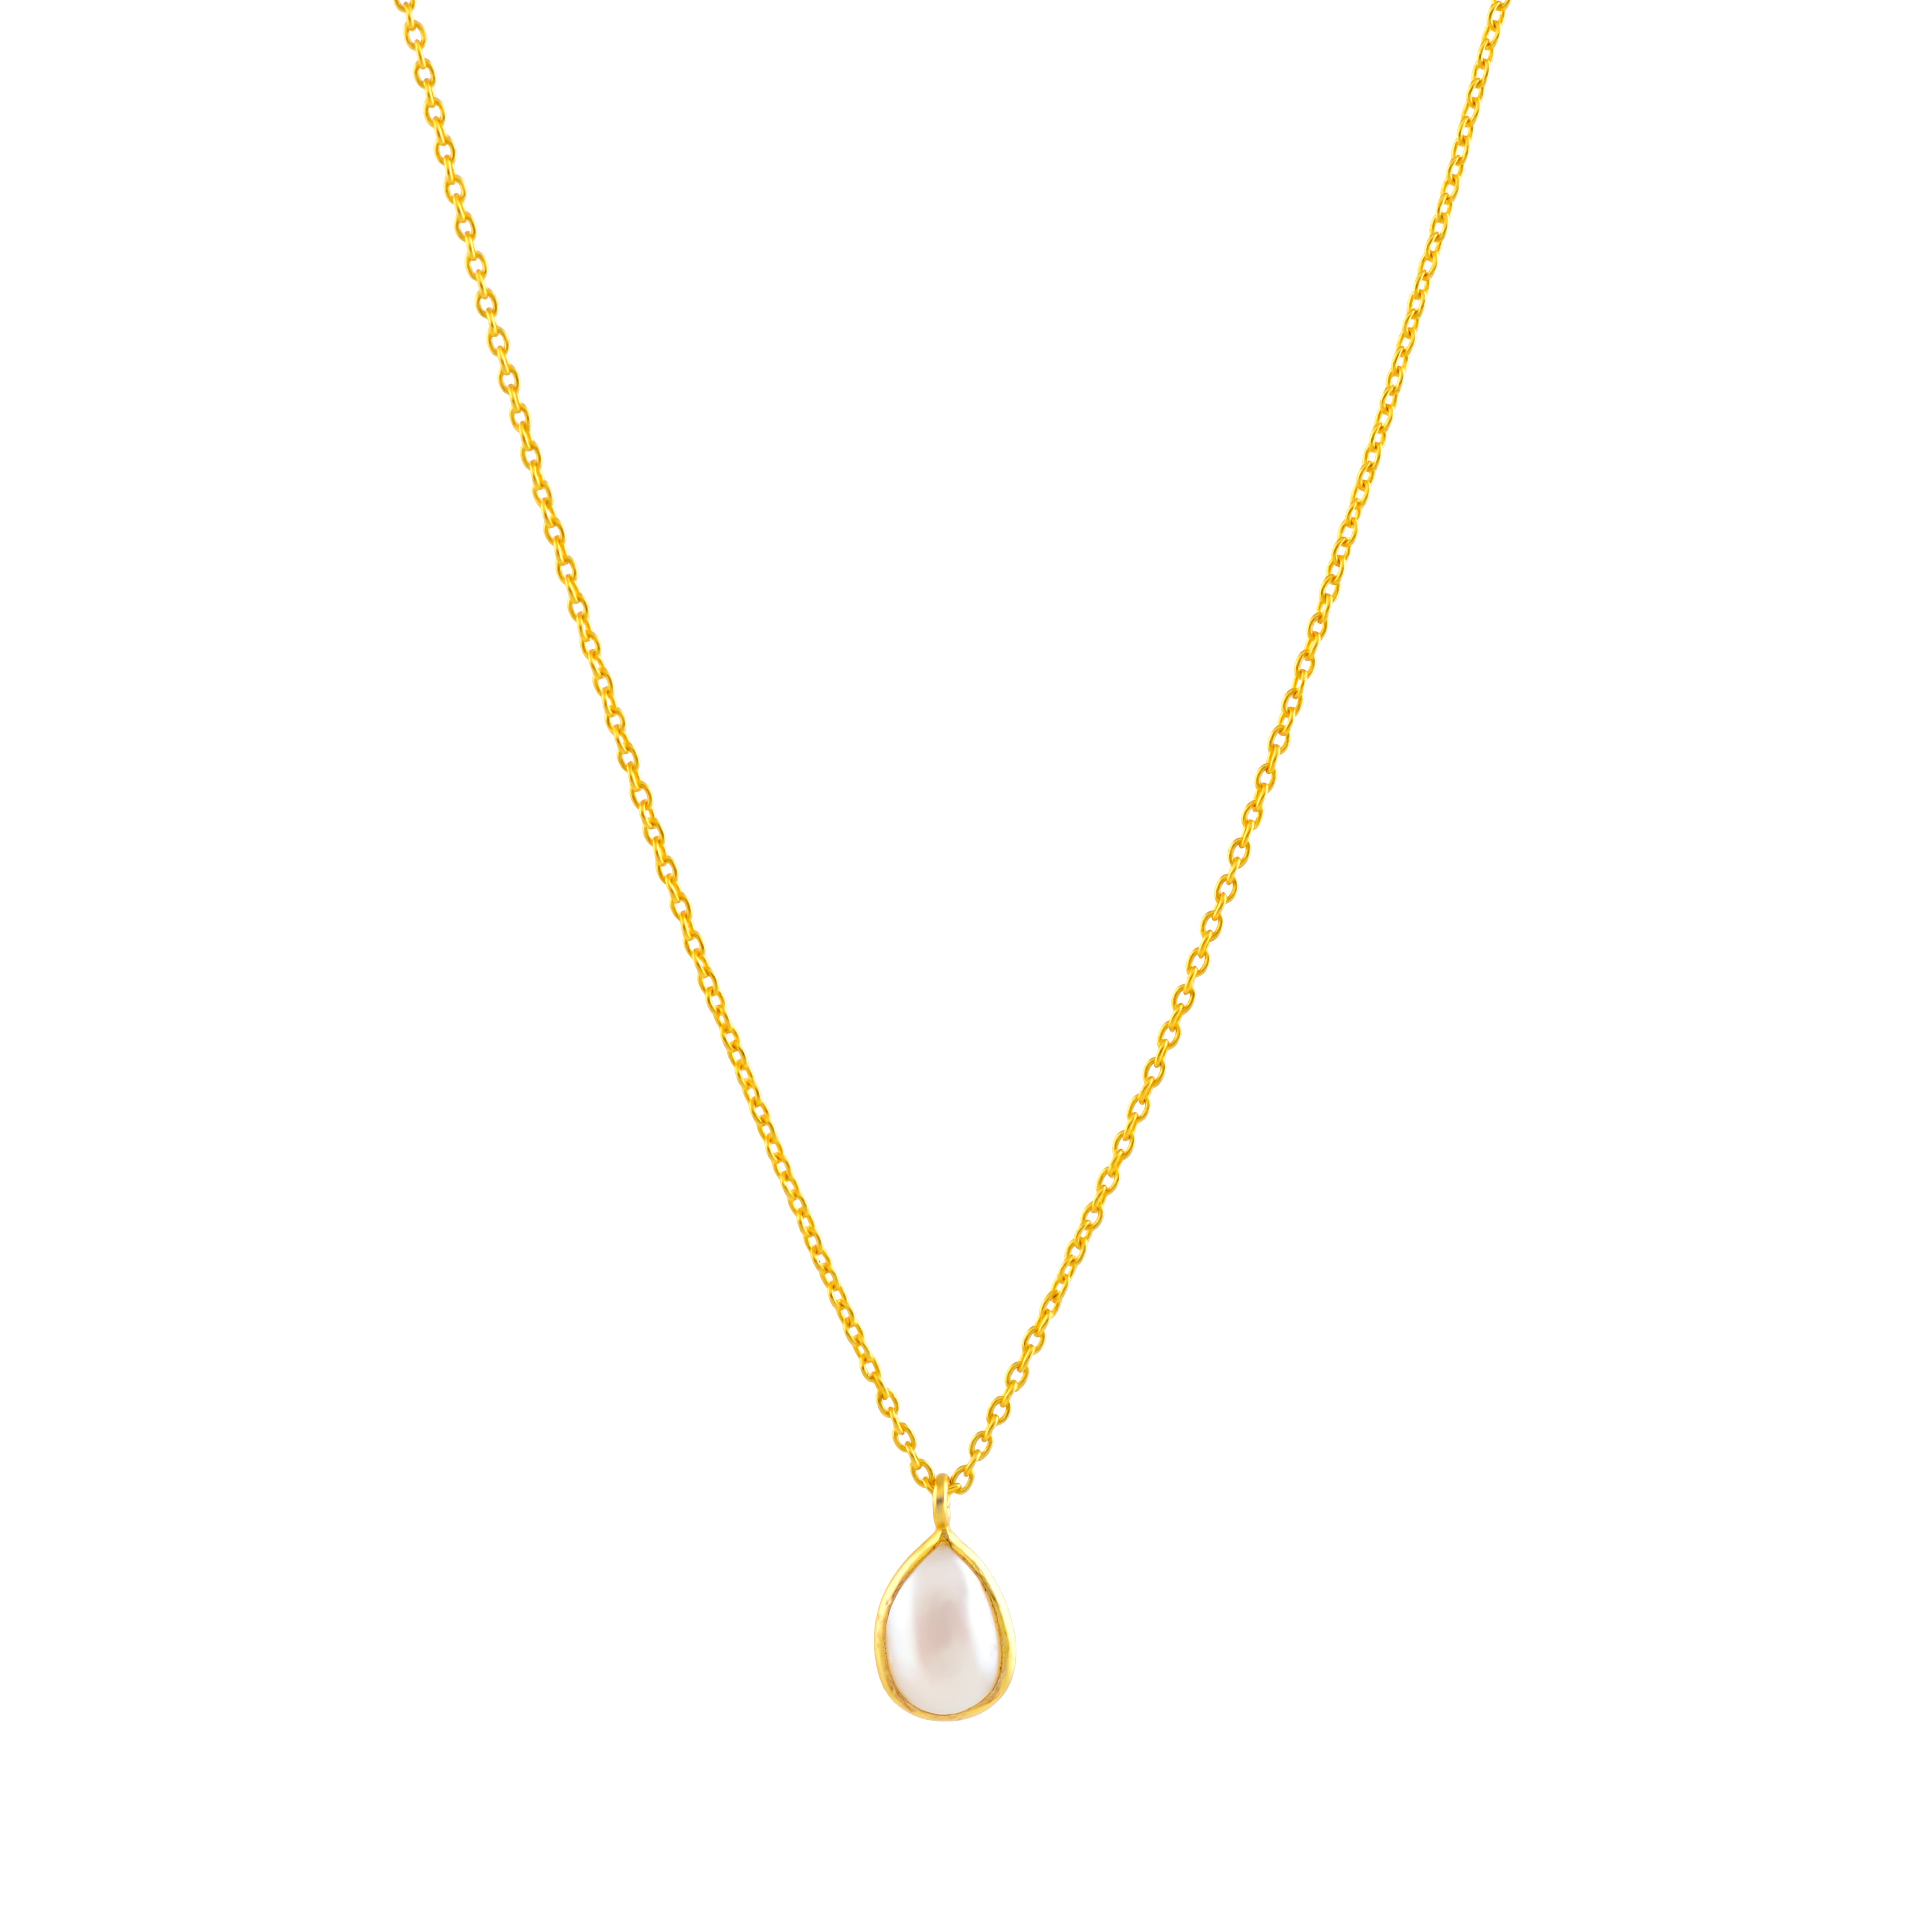 Modern Silver Fresh Water Pearl Pendant Necklace with a Gold Coating